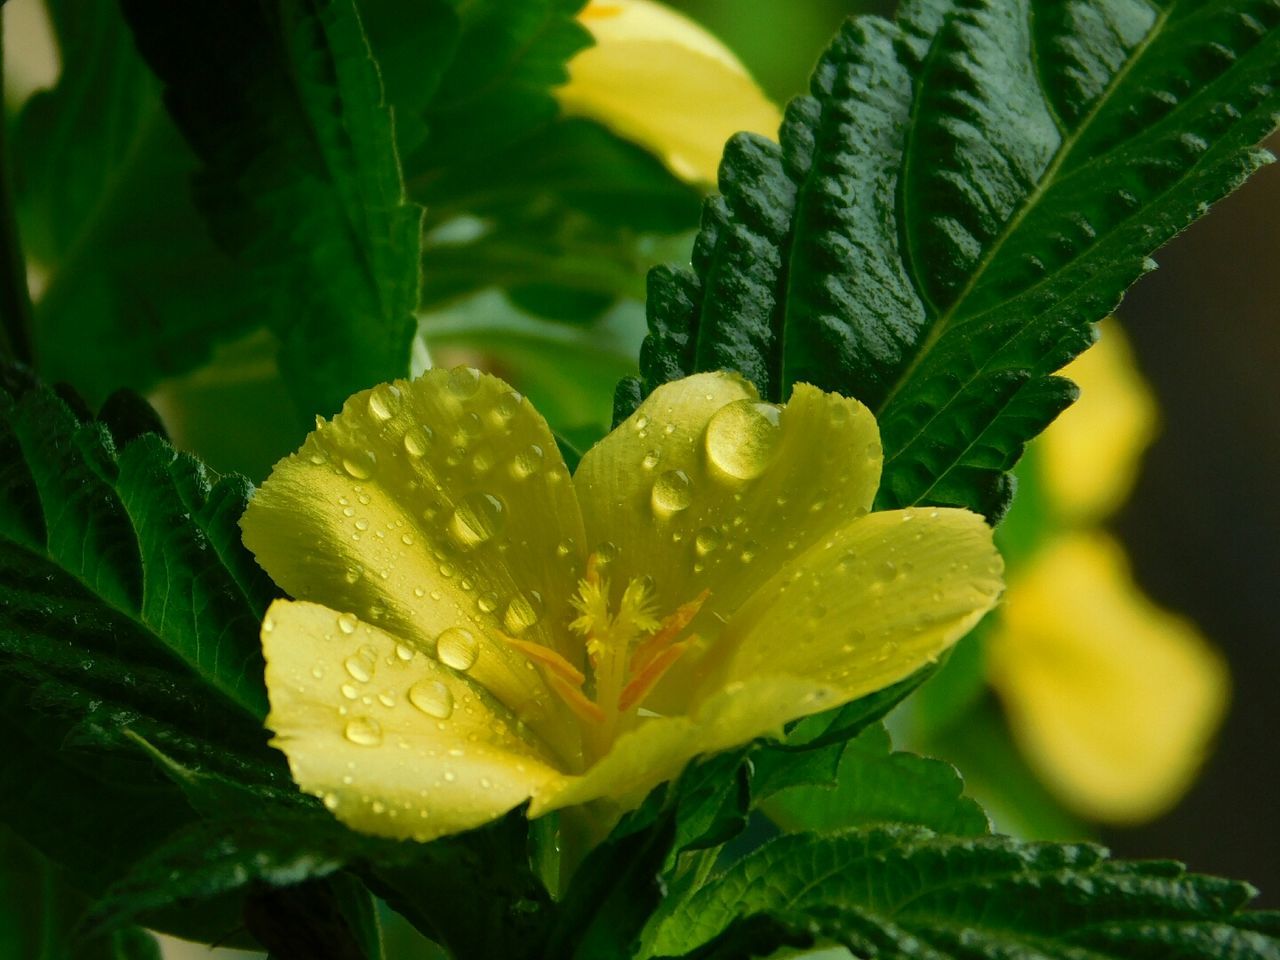 CLOSE-UP OF WATER DROPS ON YELLOW LEAF